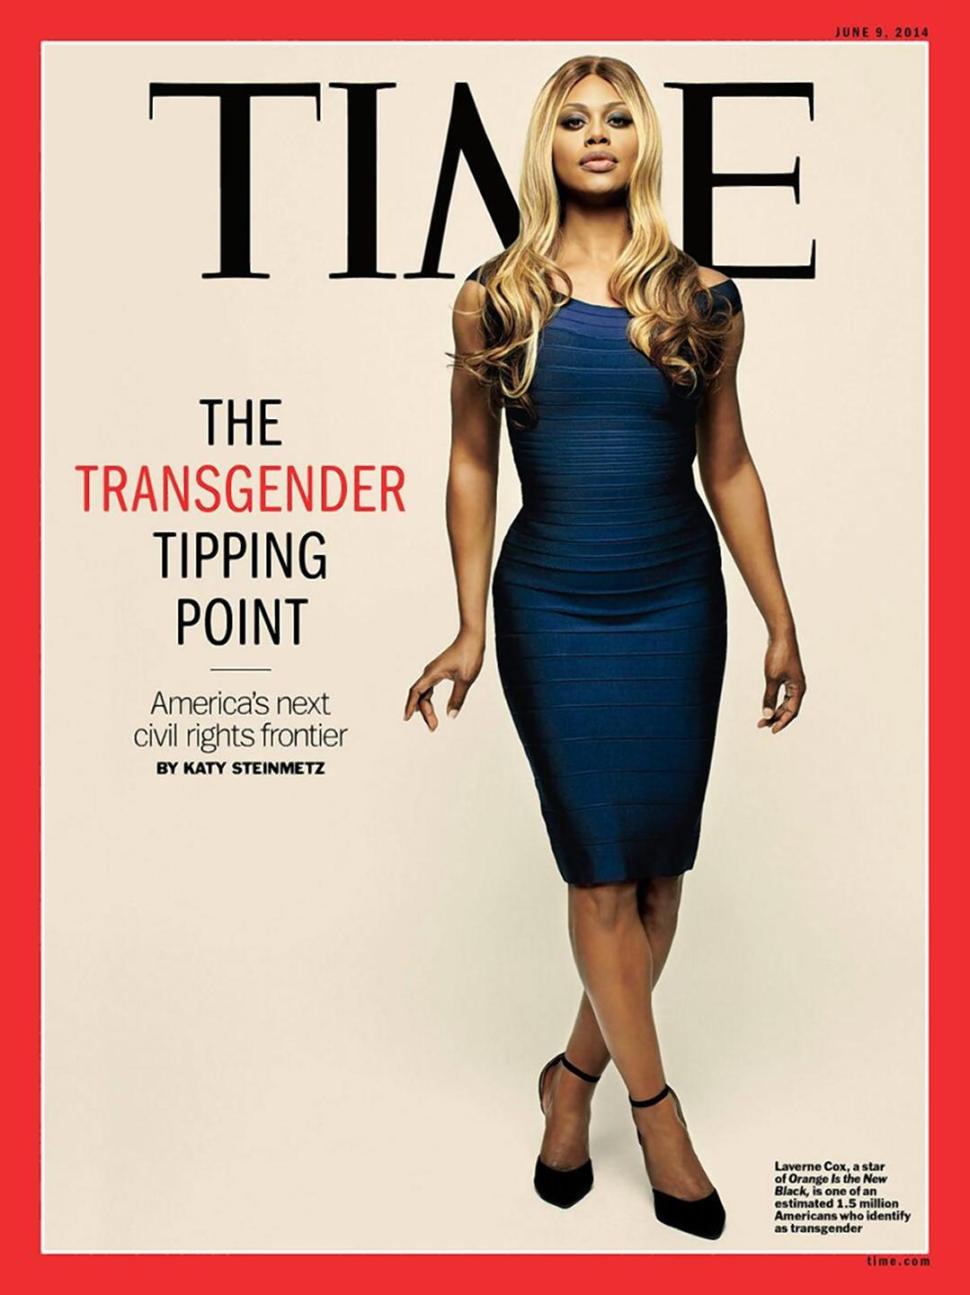 'Orange is the New Black' star Laverne Cox on the cover of TIME Magazine in a story called ' The Transgender Tipping Point.'